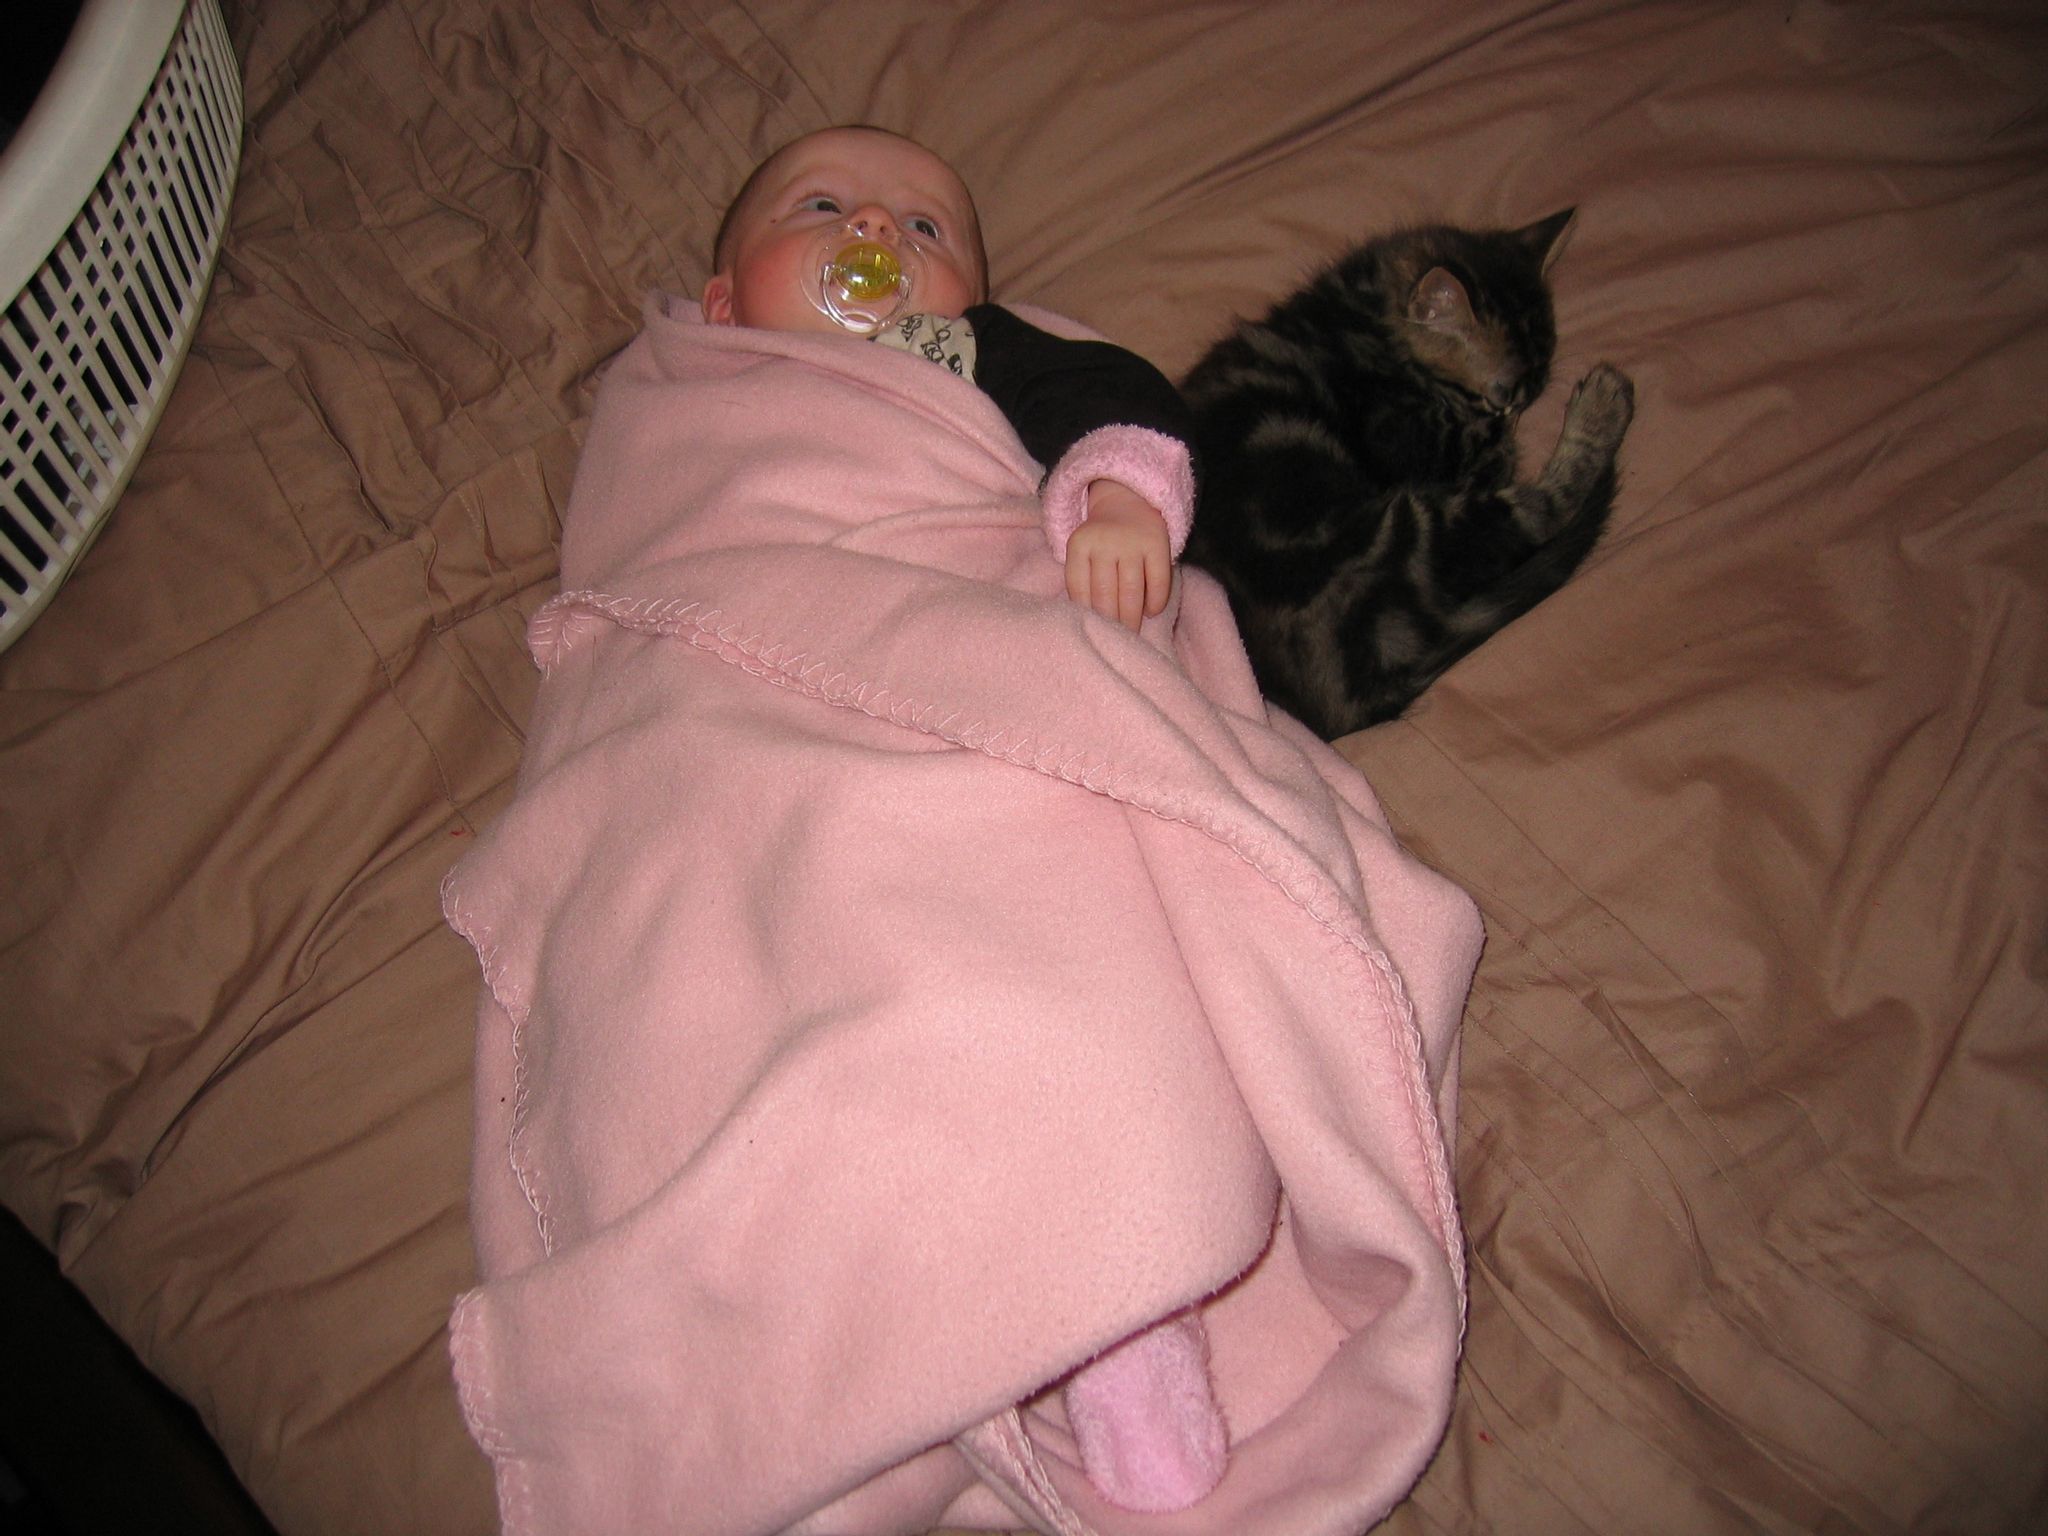 A photo of a small baby with a dummy in, wrapped in pink blankets, with a tabby kitten curled up asleep next to her.